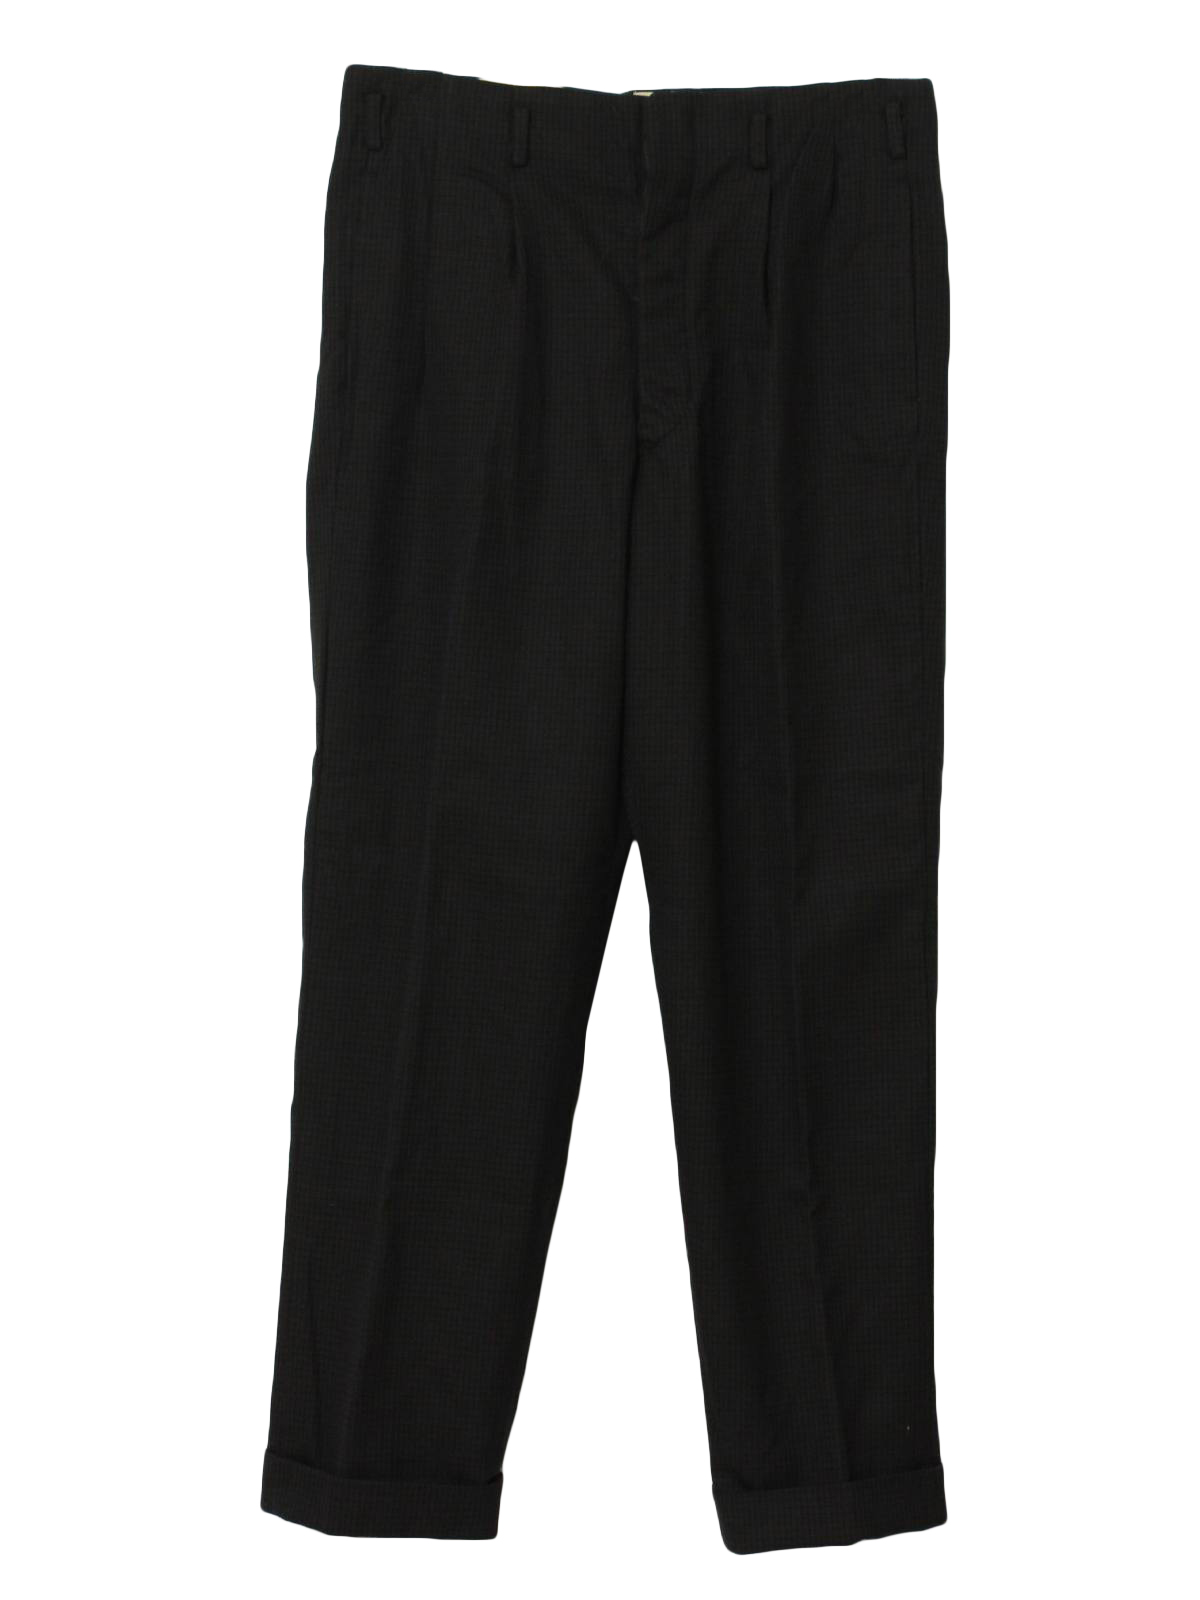 Retro 1940s Pants: Late 40s -Standalone- Mens black and golden sand ...